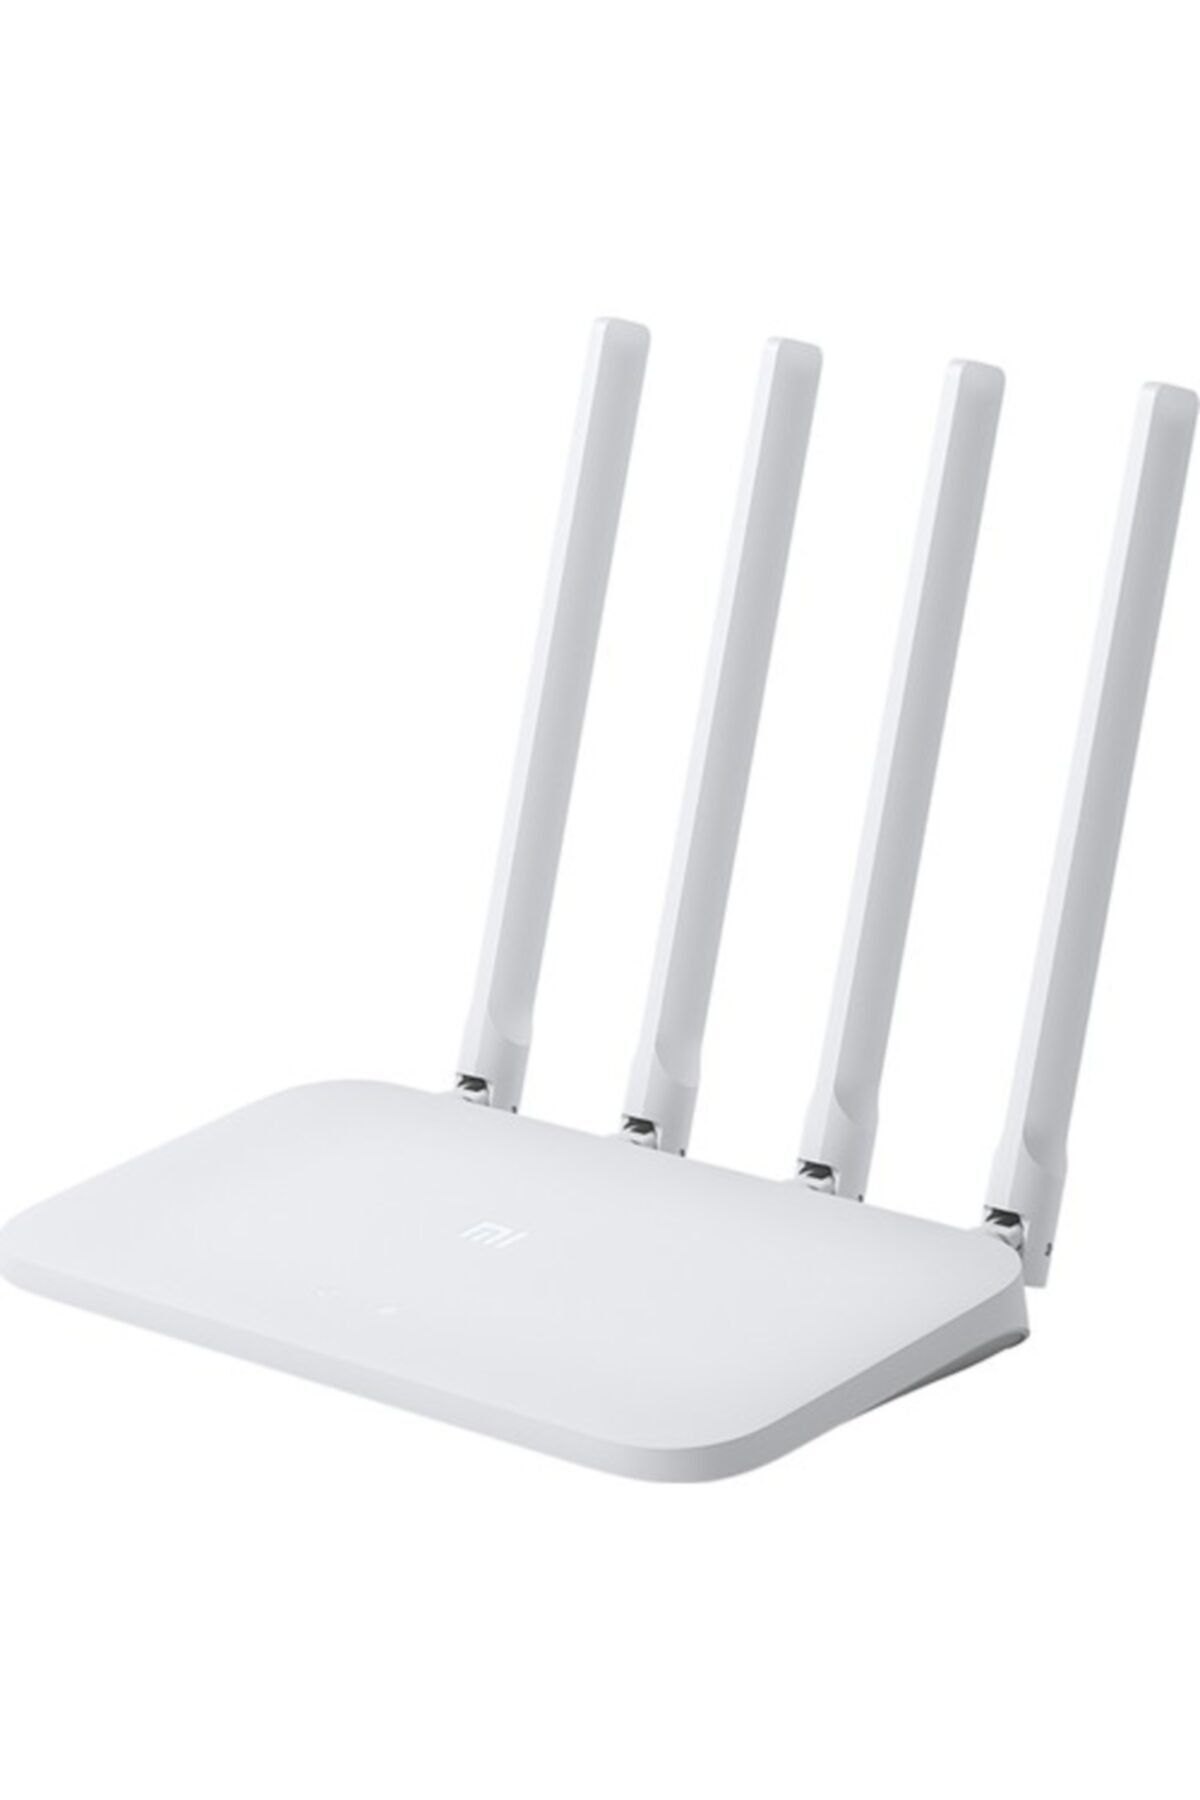 Xiaomi Mi Router 4c 300mbps Router, Access Point, Repeater